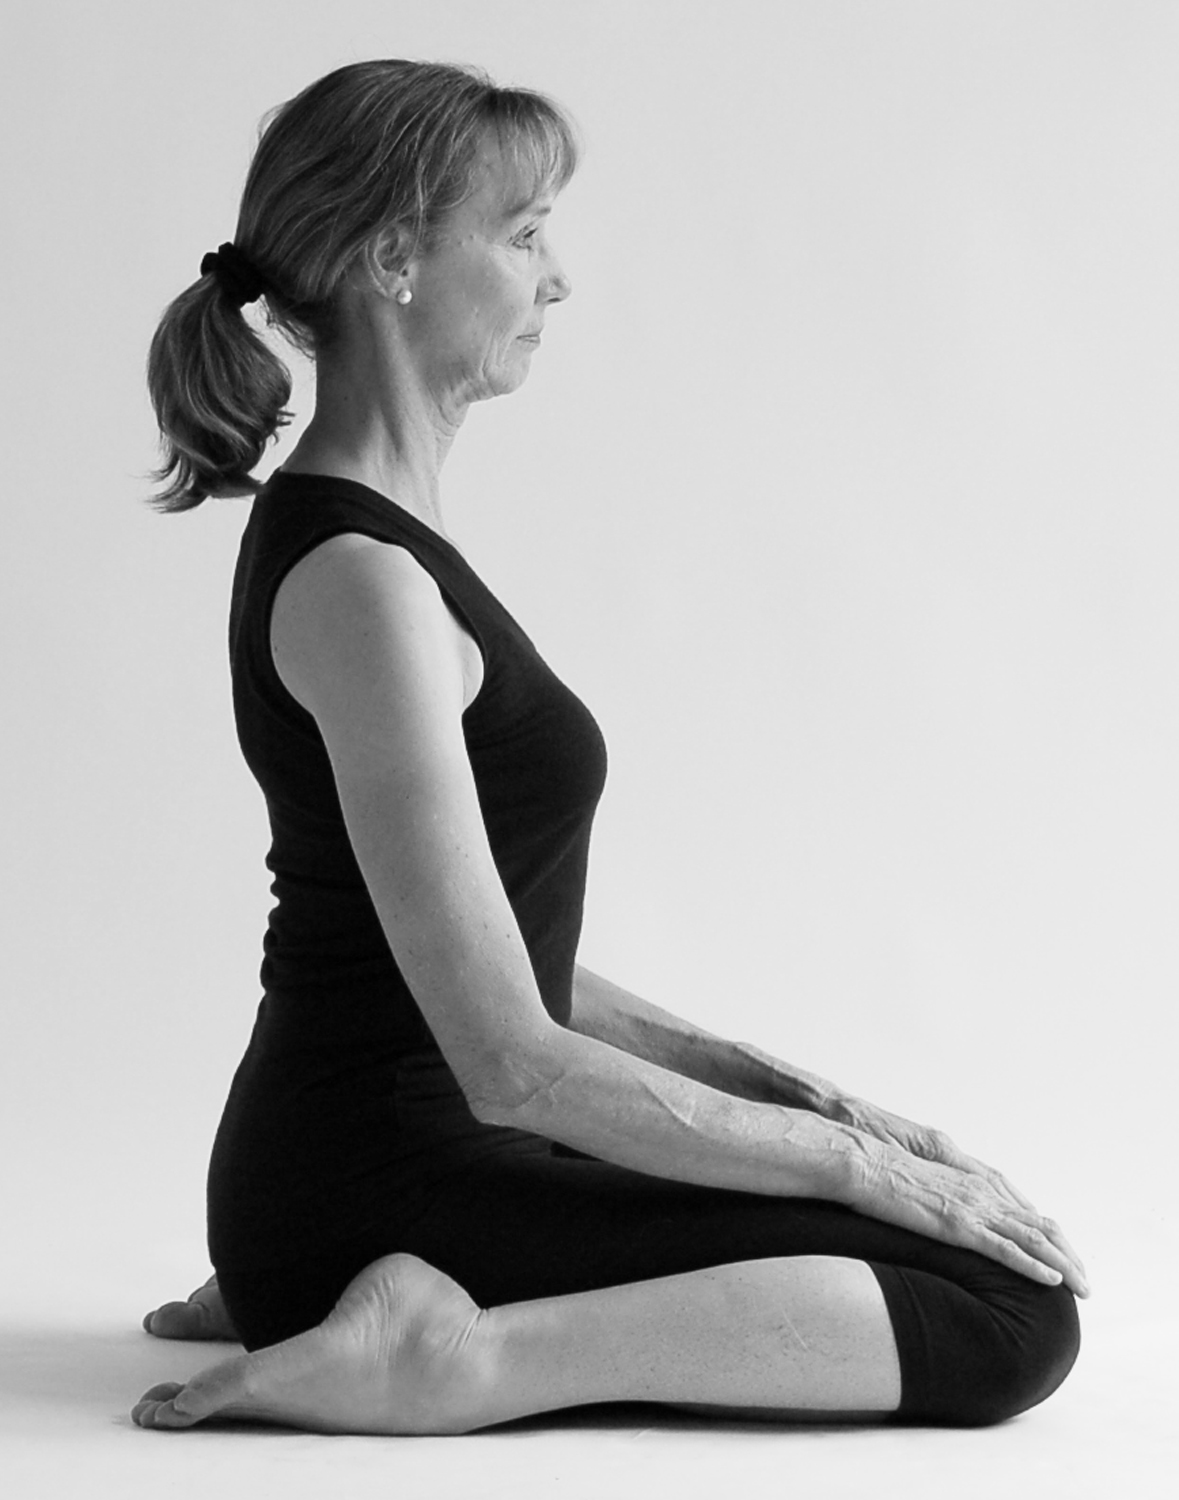 NourishDoc - Hero Pose Virasana:👇 (veer-AHS-anna) vira = man, hero, chief  A basic, sitting posture, Vrishna is excellent for meditation🧘 Although it  is a wonderful pose to keep your knees mobile and